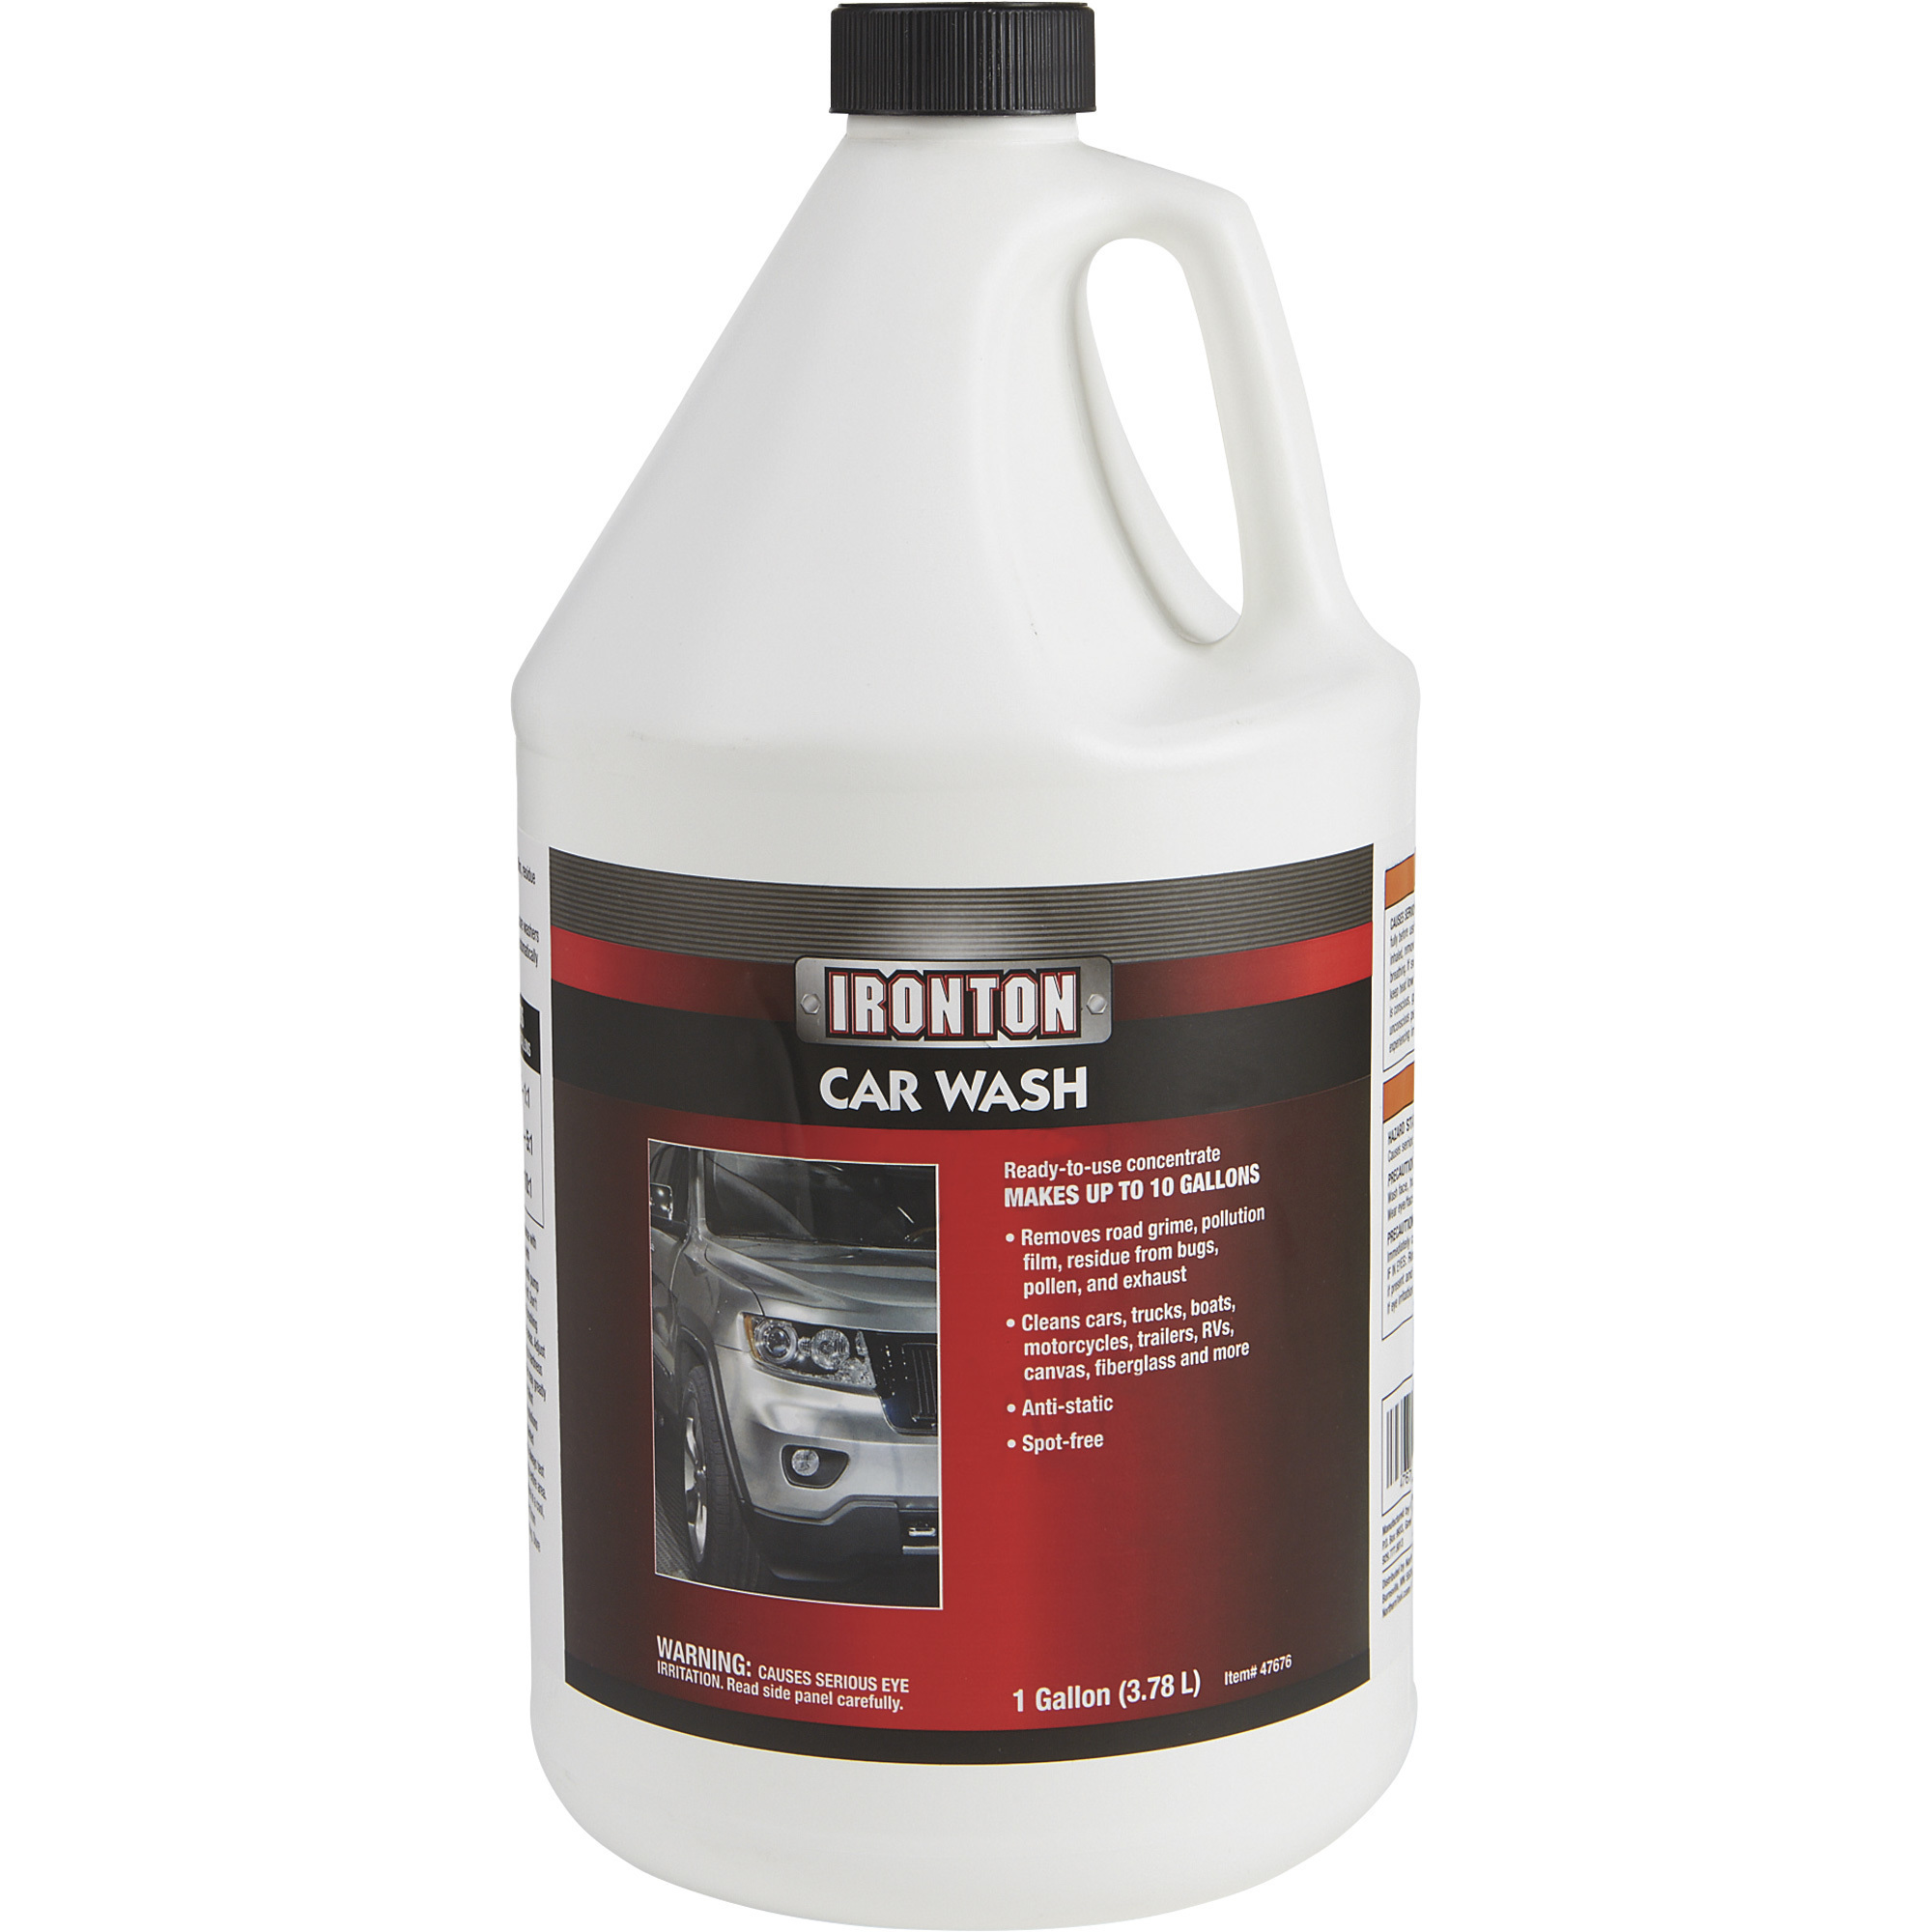 Ironton Concentrated Pressure Washer Car Wash â 1 Gallon, Model ICW